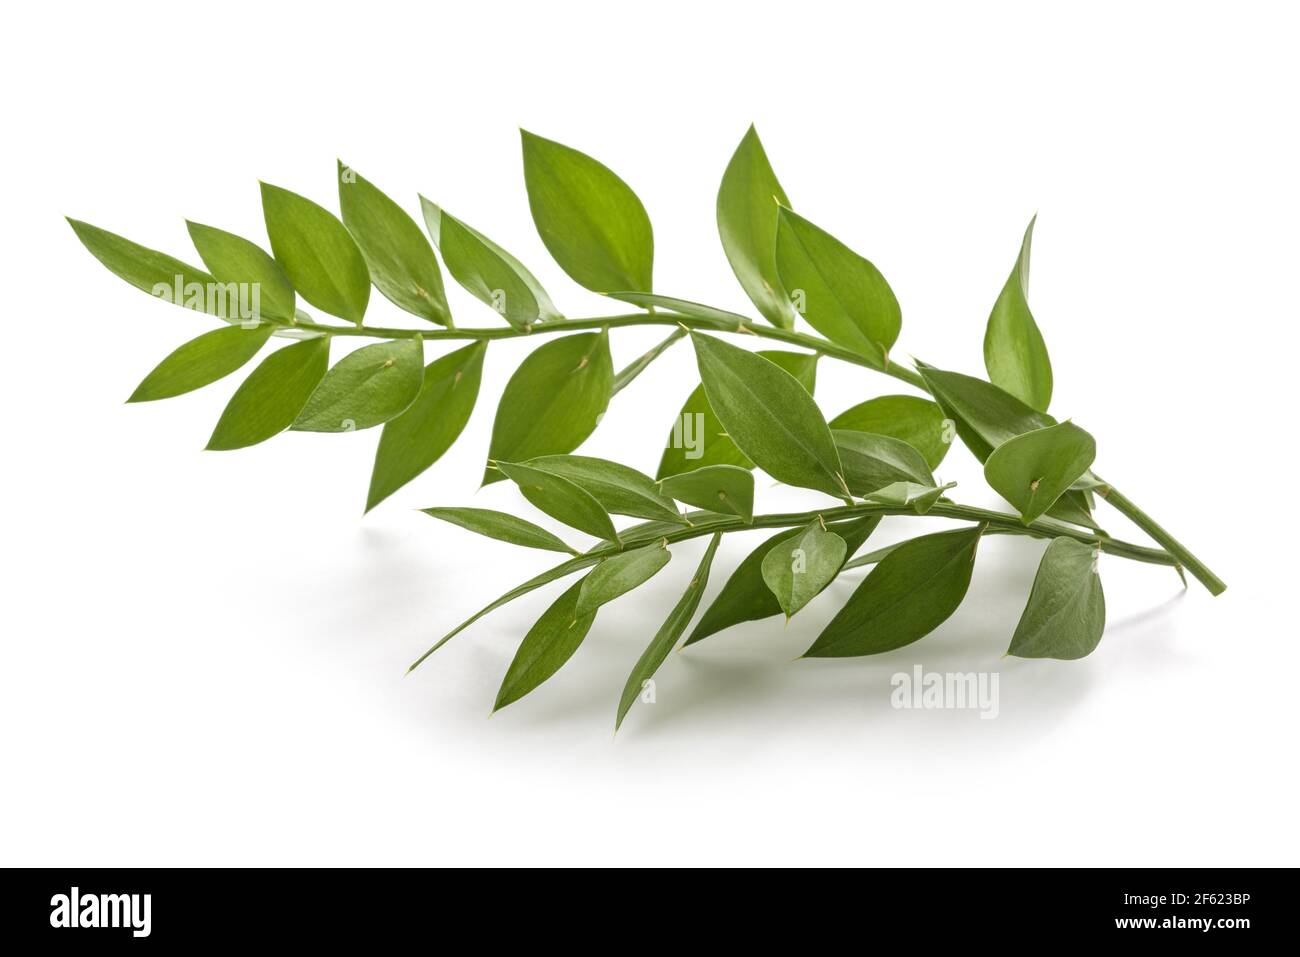 Butcher's-broom branch isolated on white background Stock Photo